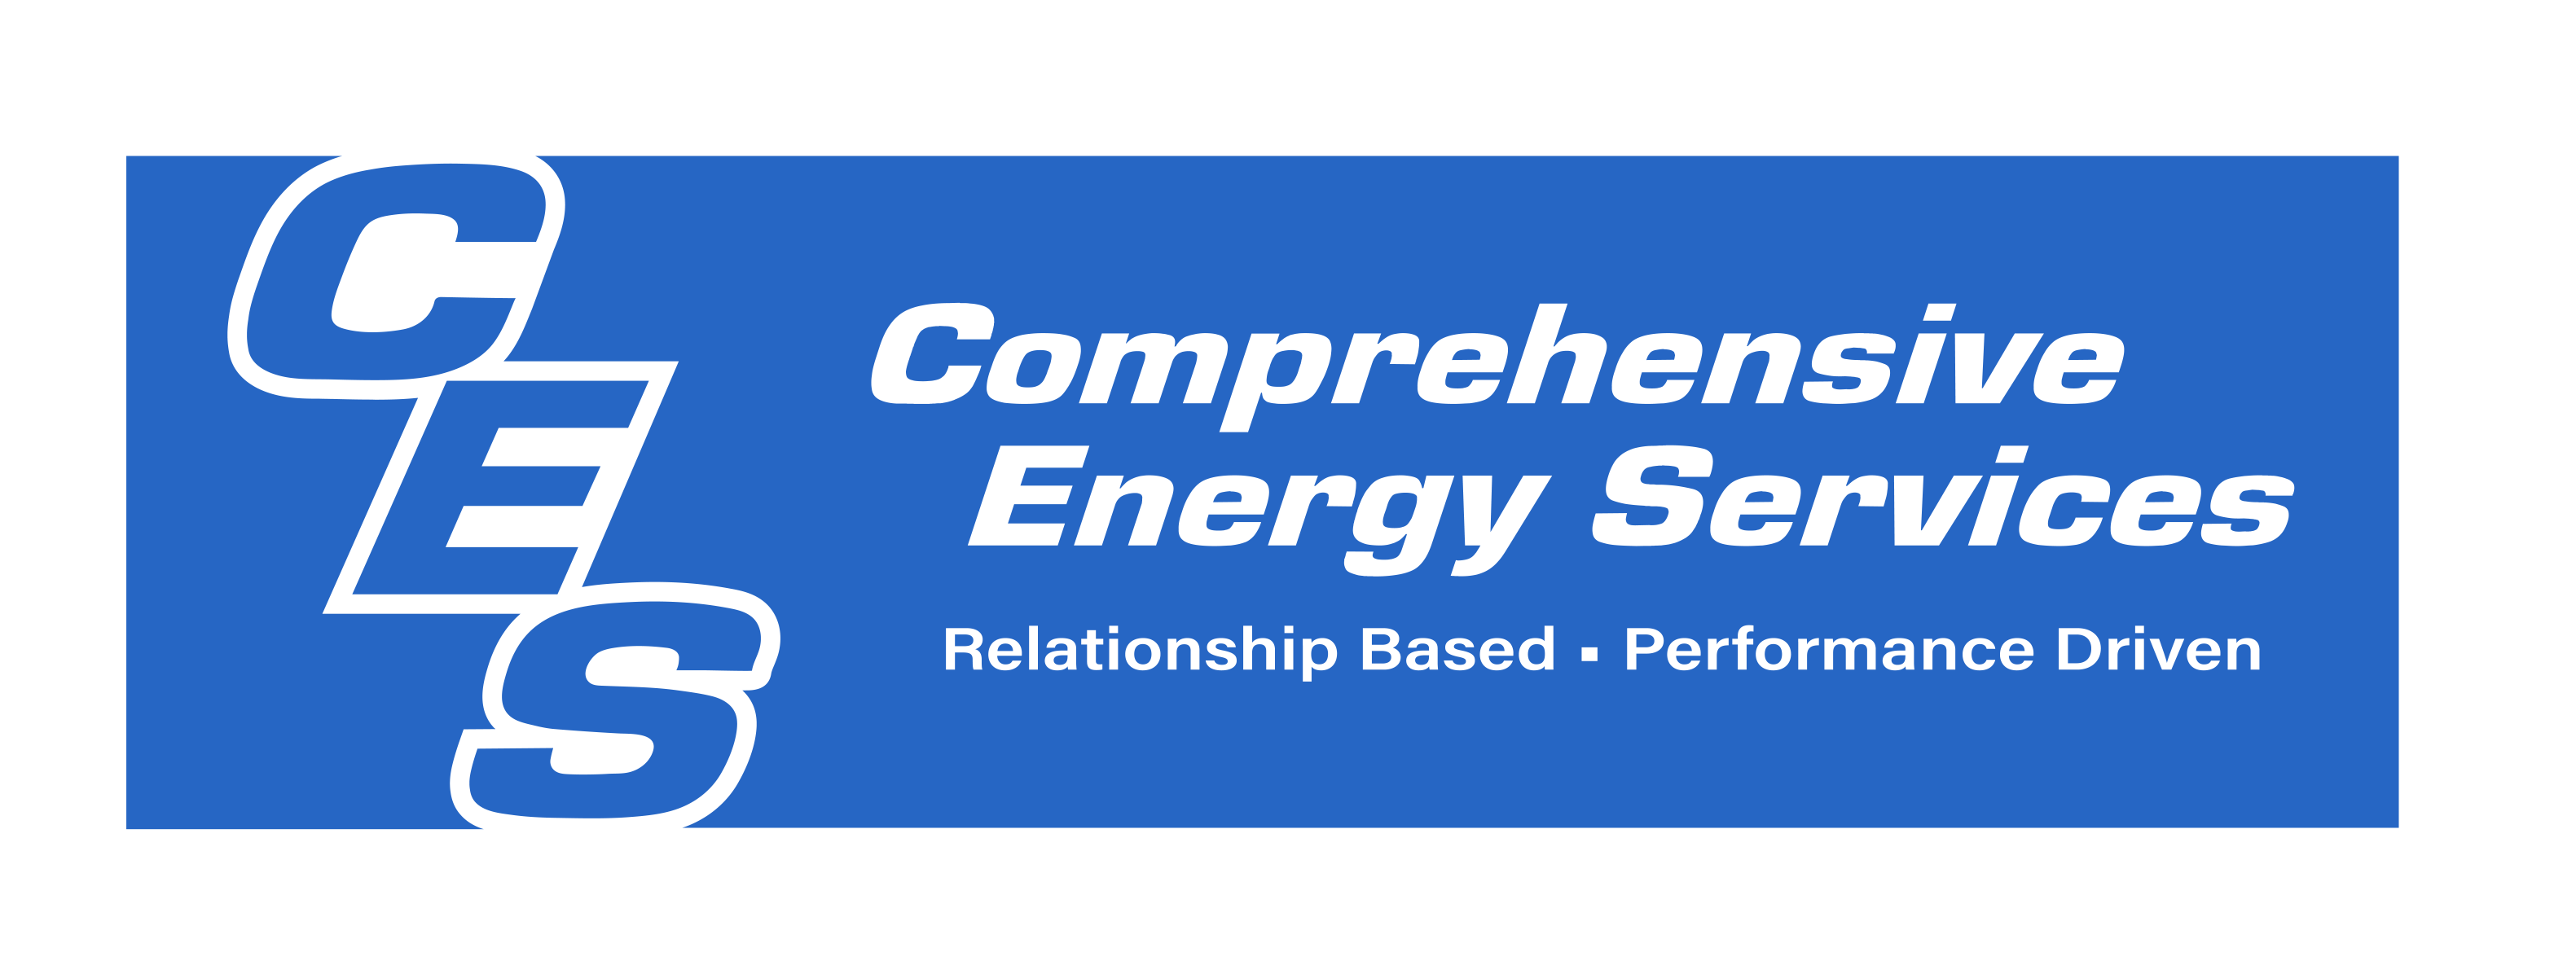 Comprehensive Energy Services, Inc | Relationship Based • Performance Driven